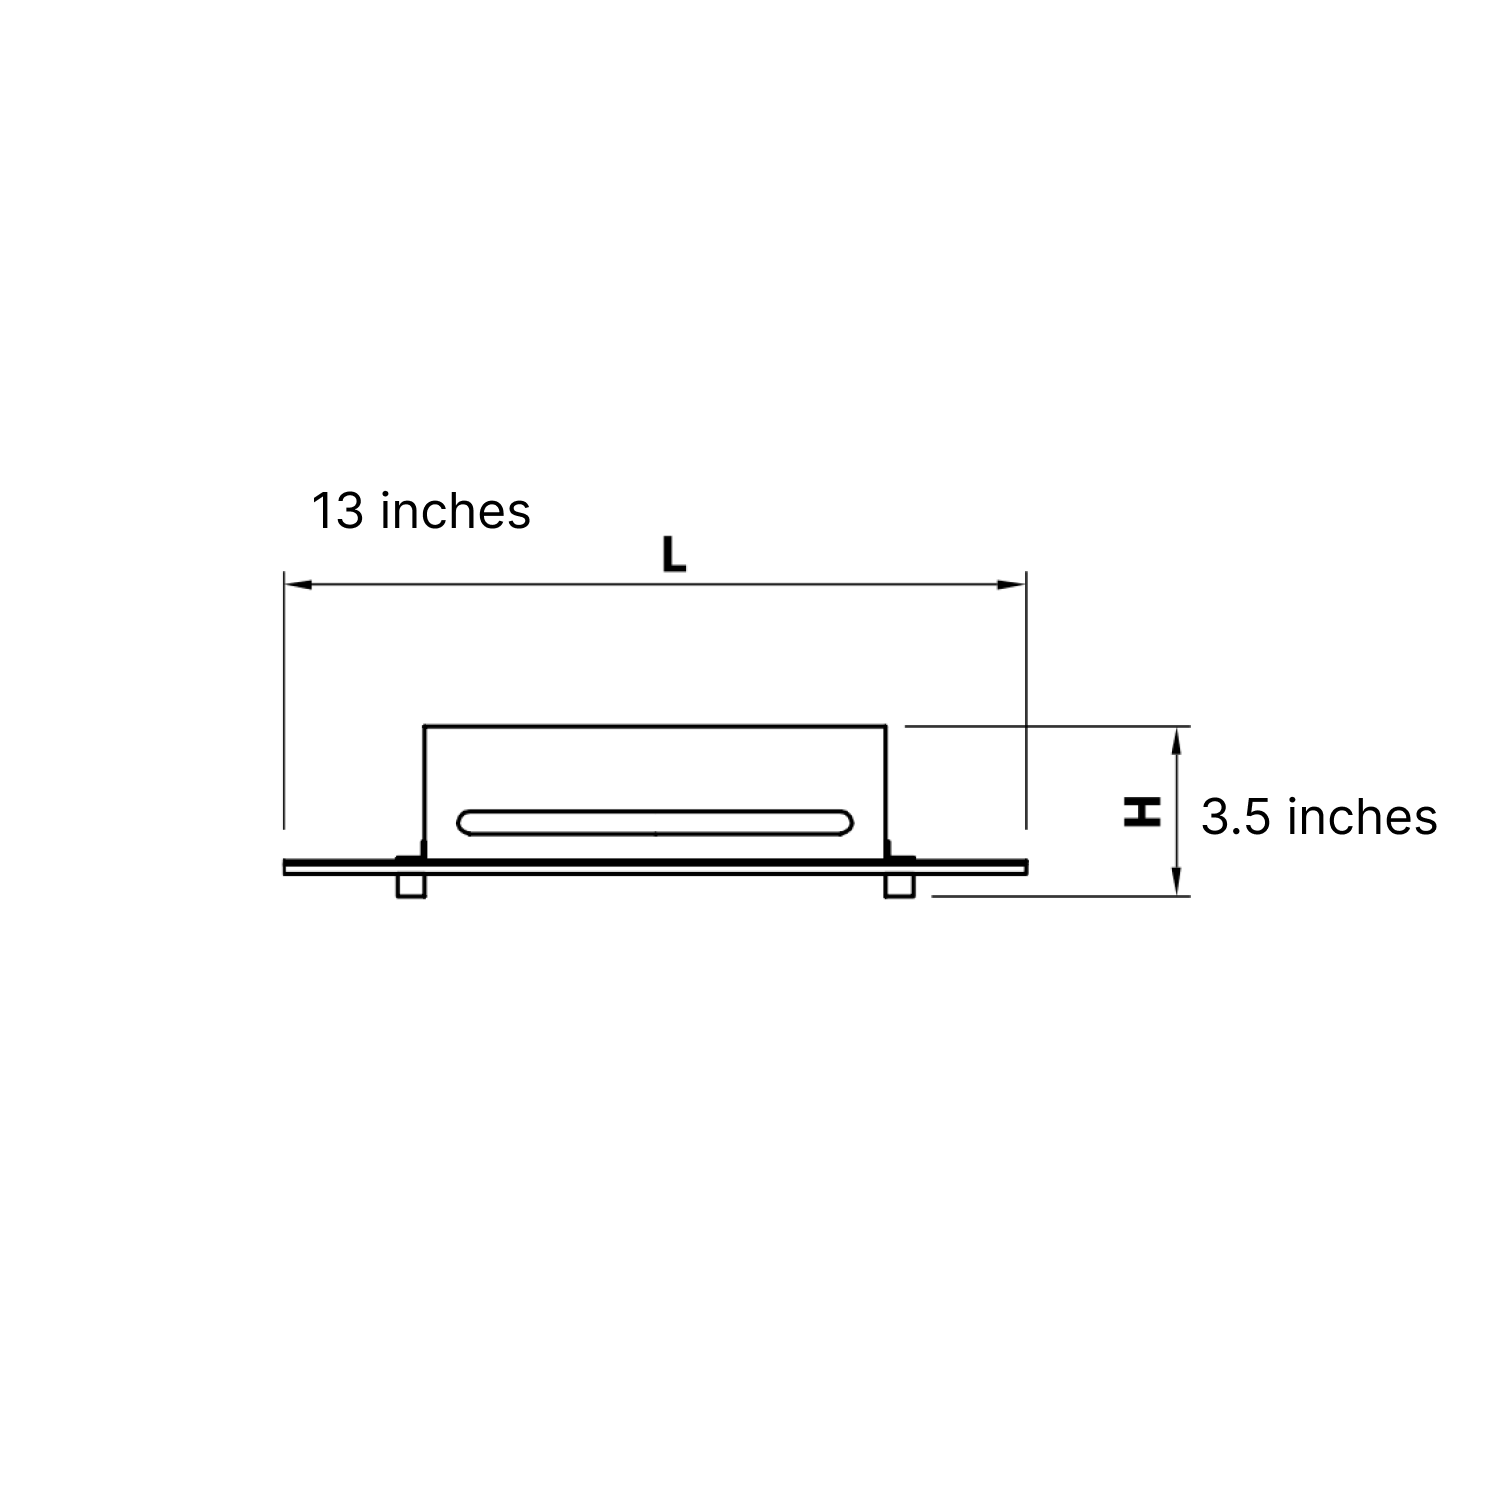 13 Inch Square LED Satin Nickel Ceiling Light, Surface Mount, 1700 Lumens